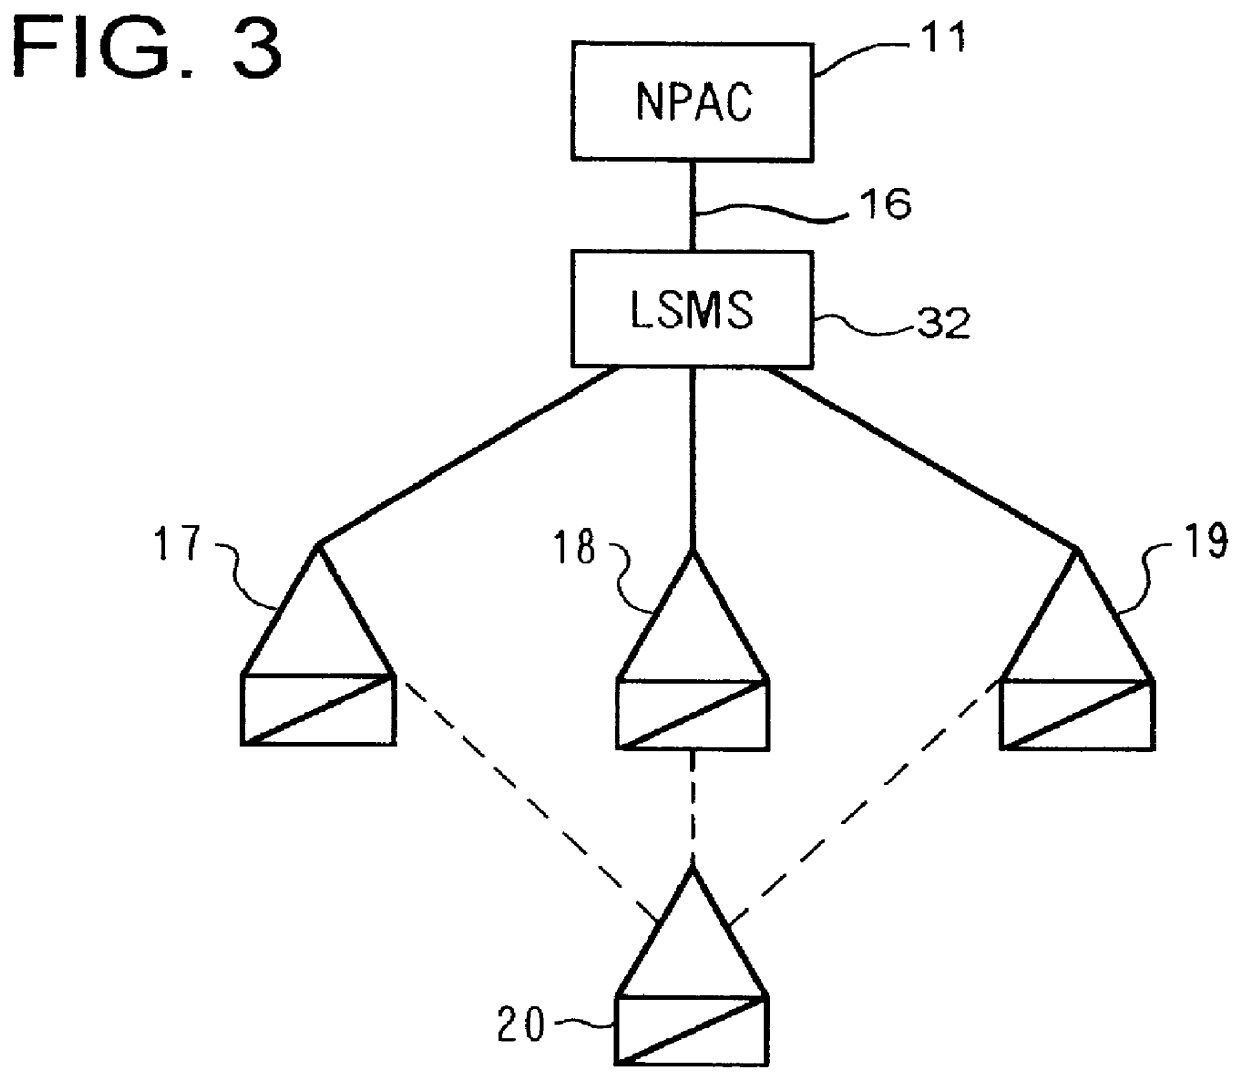 Flexible routing of local number portability (LNP) data in a telecommunications network